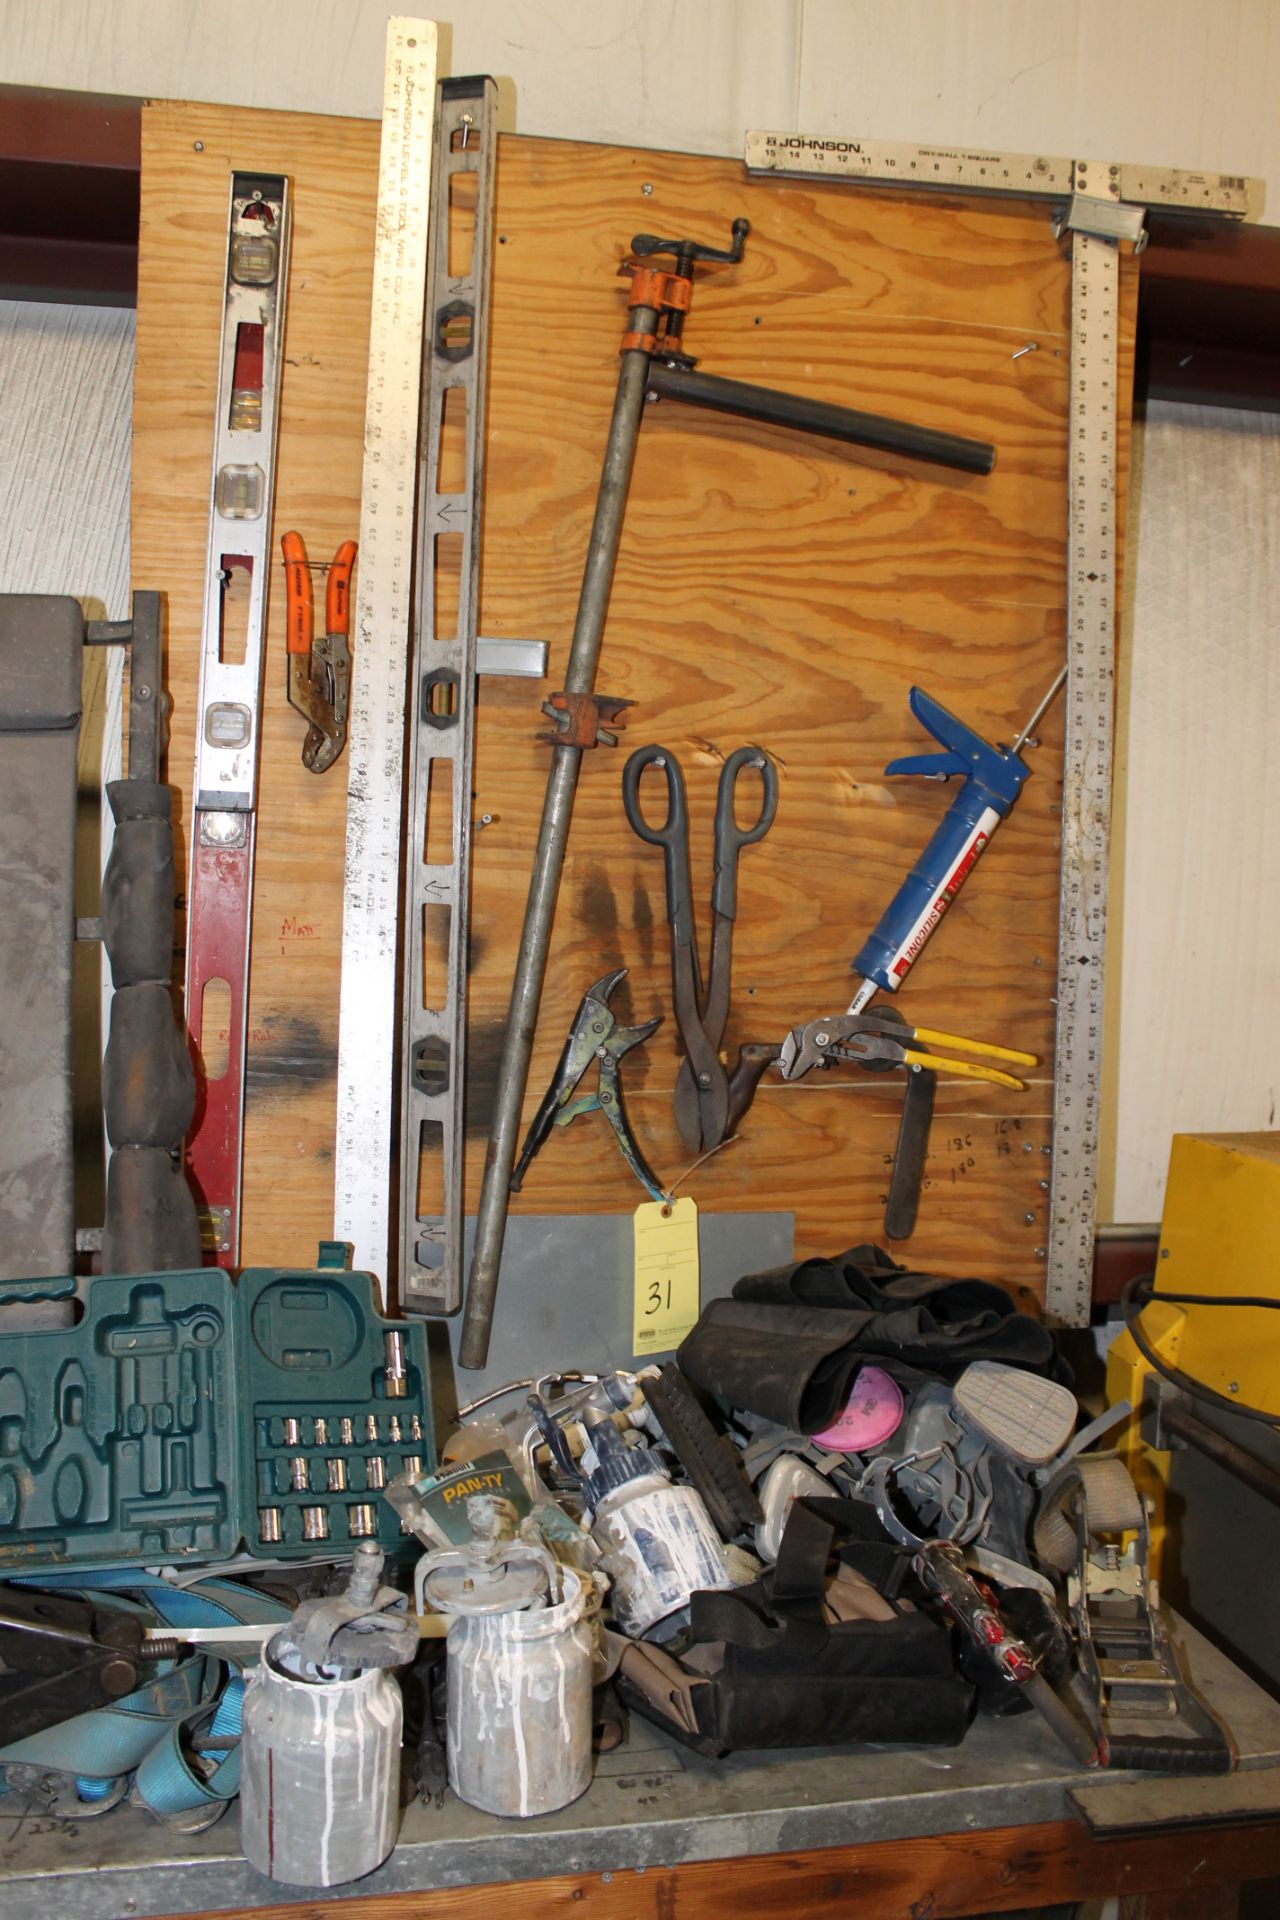 LOT OF MISC. SHOP TOOLS, including: Spirit levels, T squares, tin snips, safety harnesses, etc. (